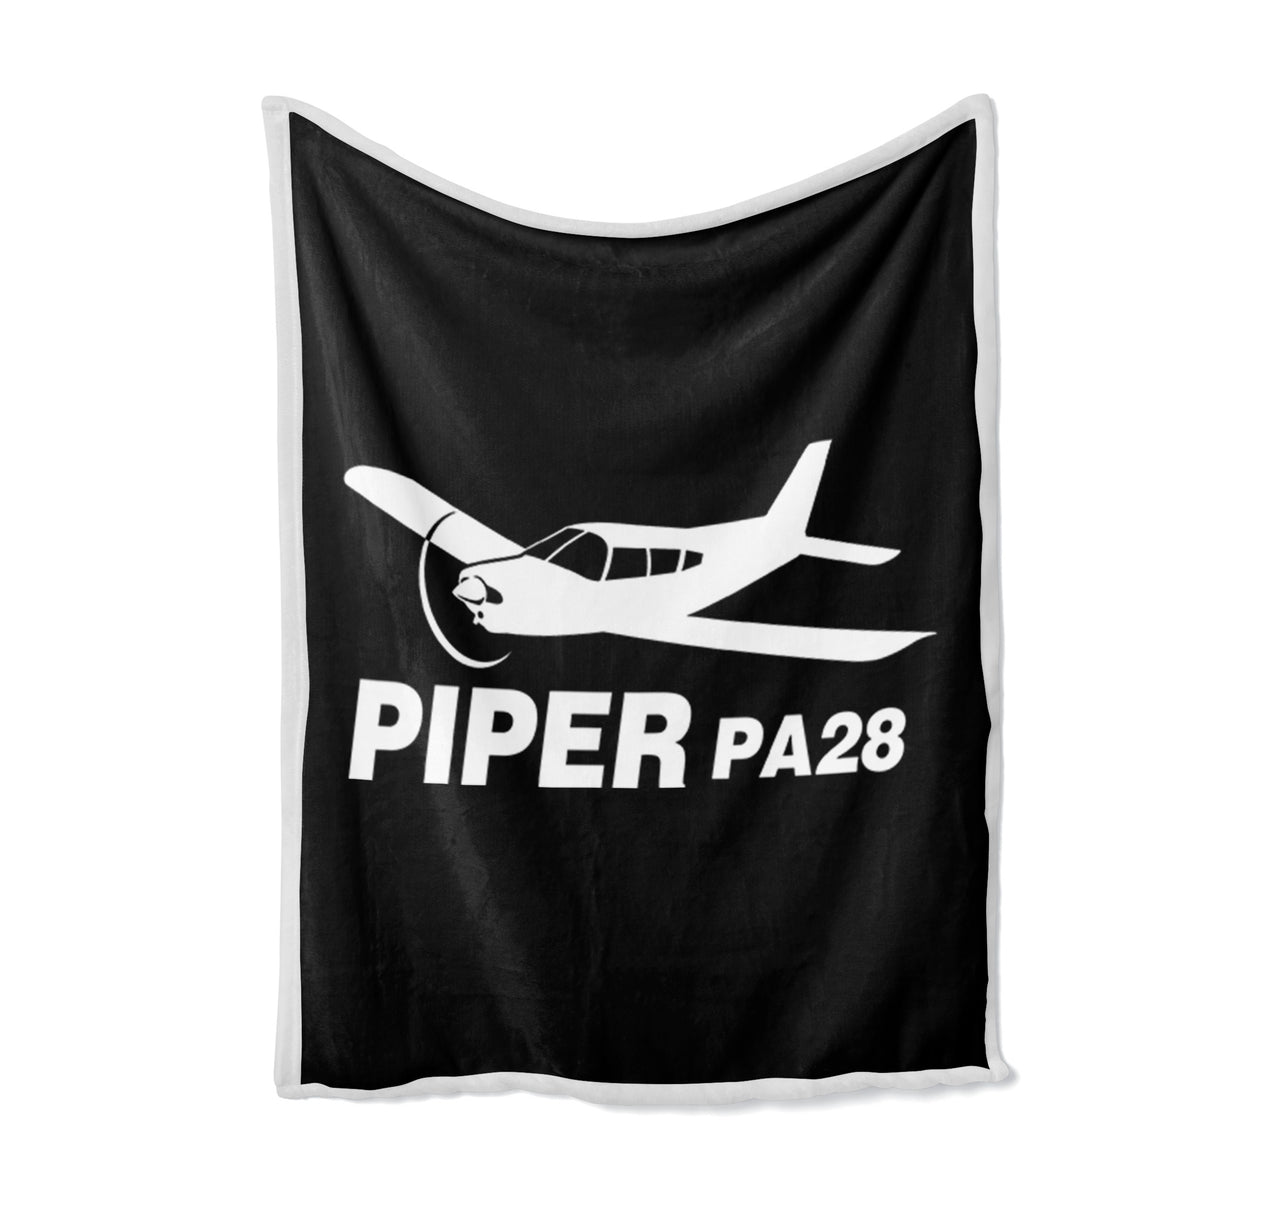 The Piper PA28 Designed Bed Blankets & Covers